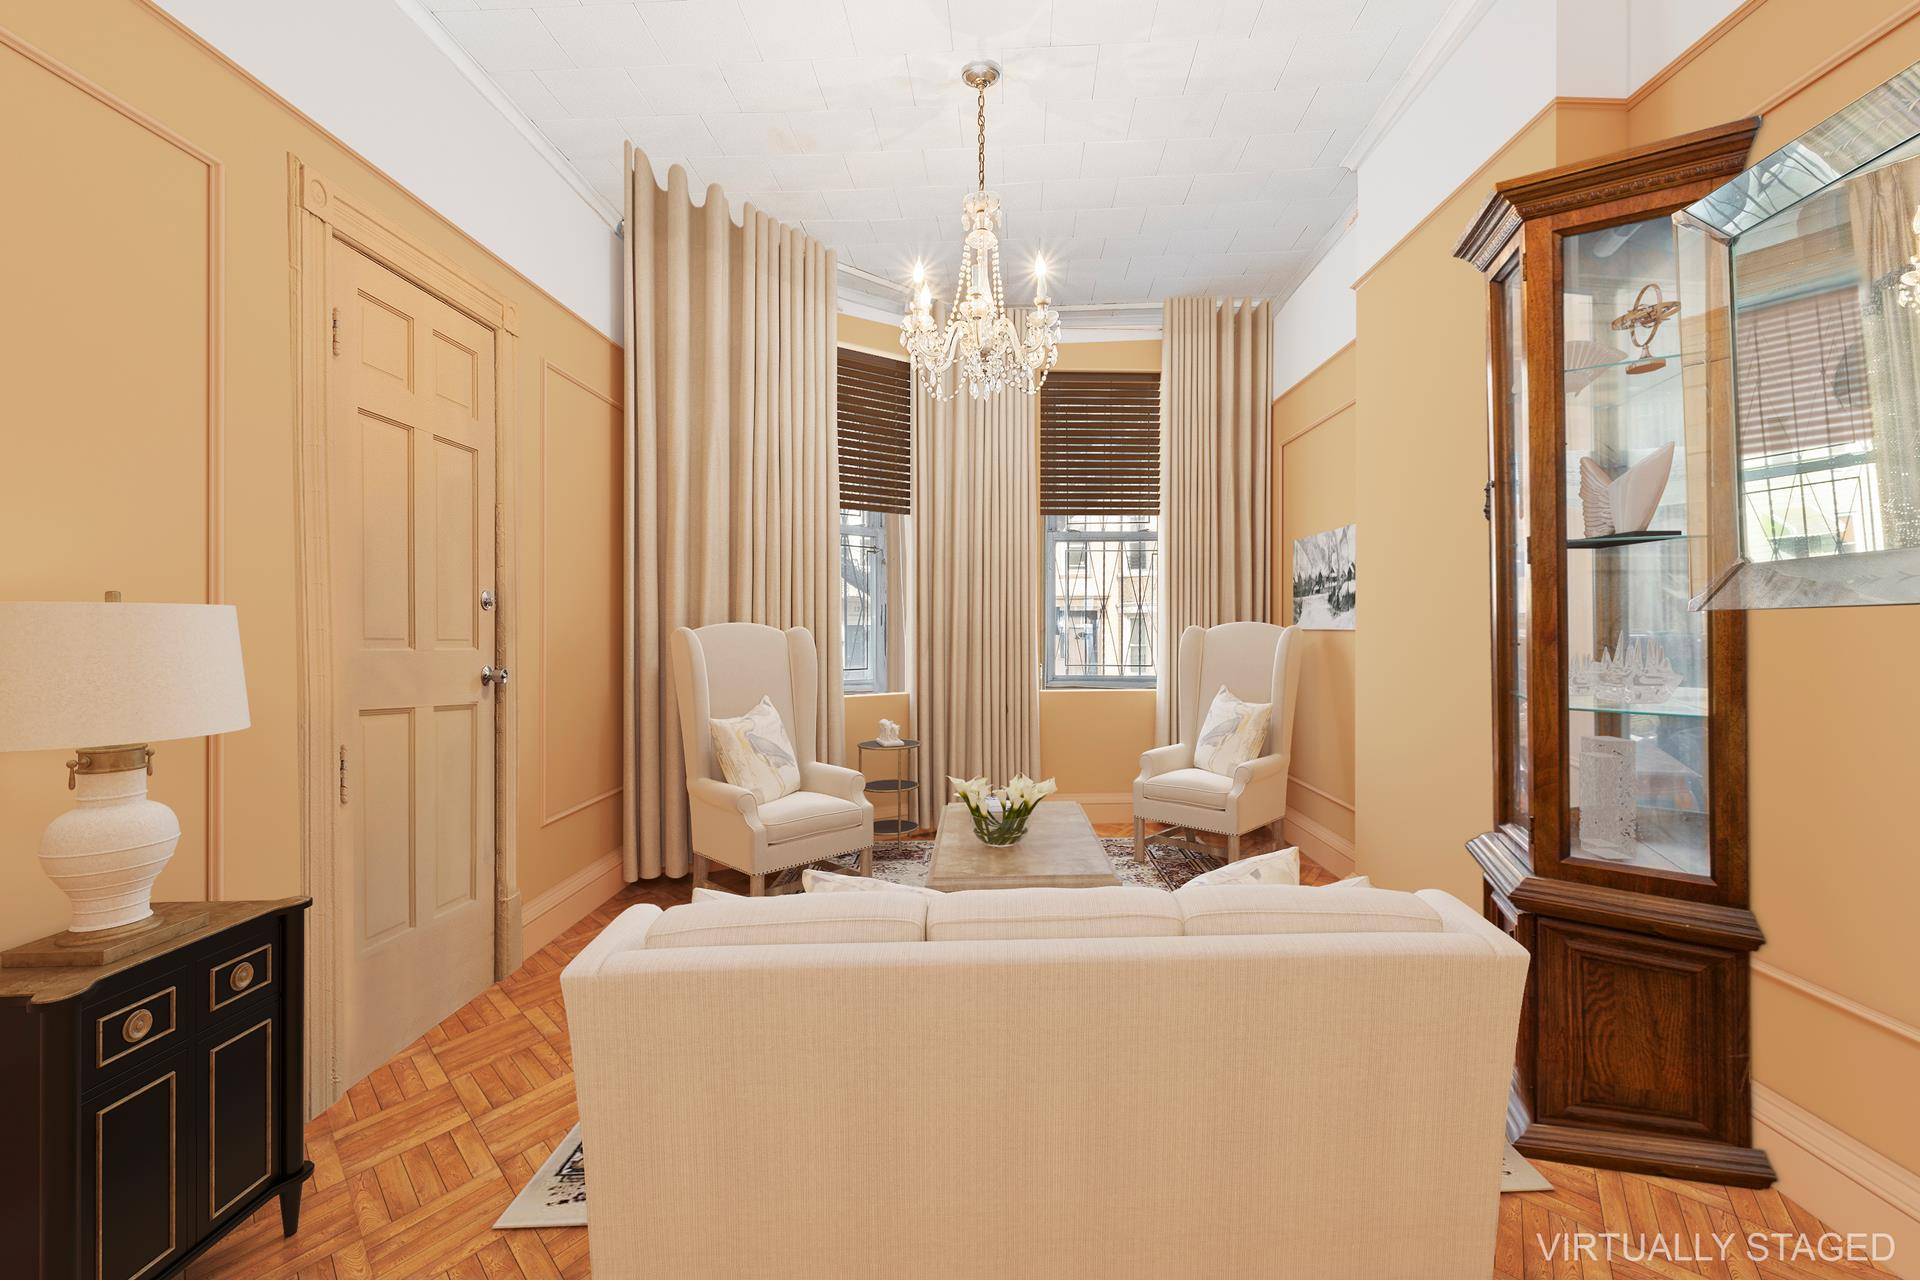 Located in Crown Heights and held by the current owner since 2004, offered is an 18' wide, gated, semi detached, 2 family brick townhouse consisting of a 6 room apartment ...